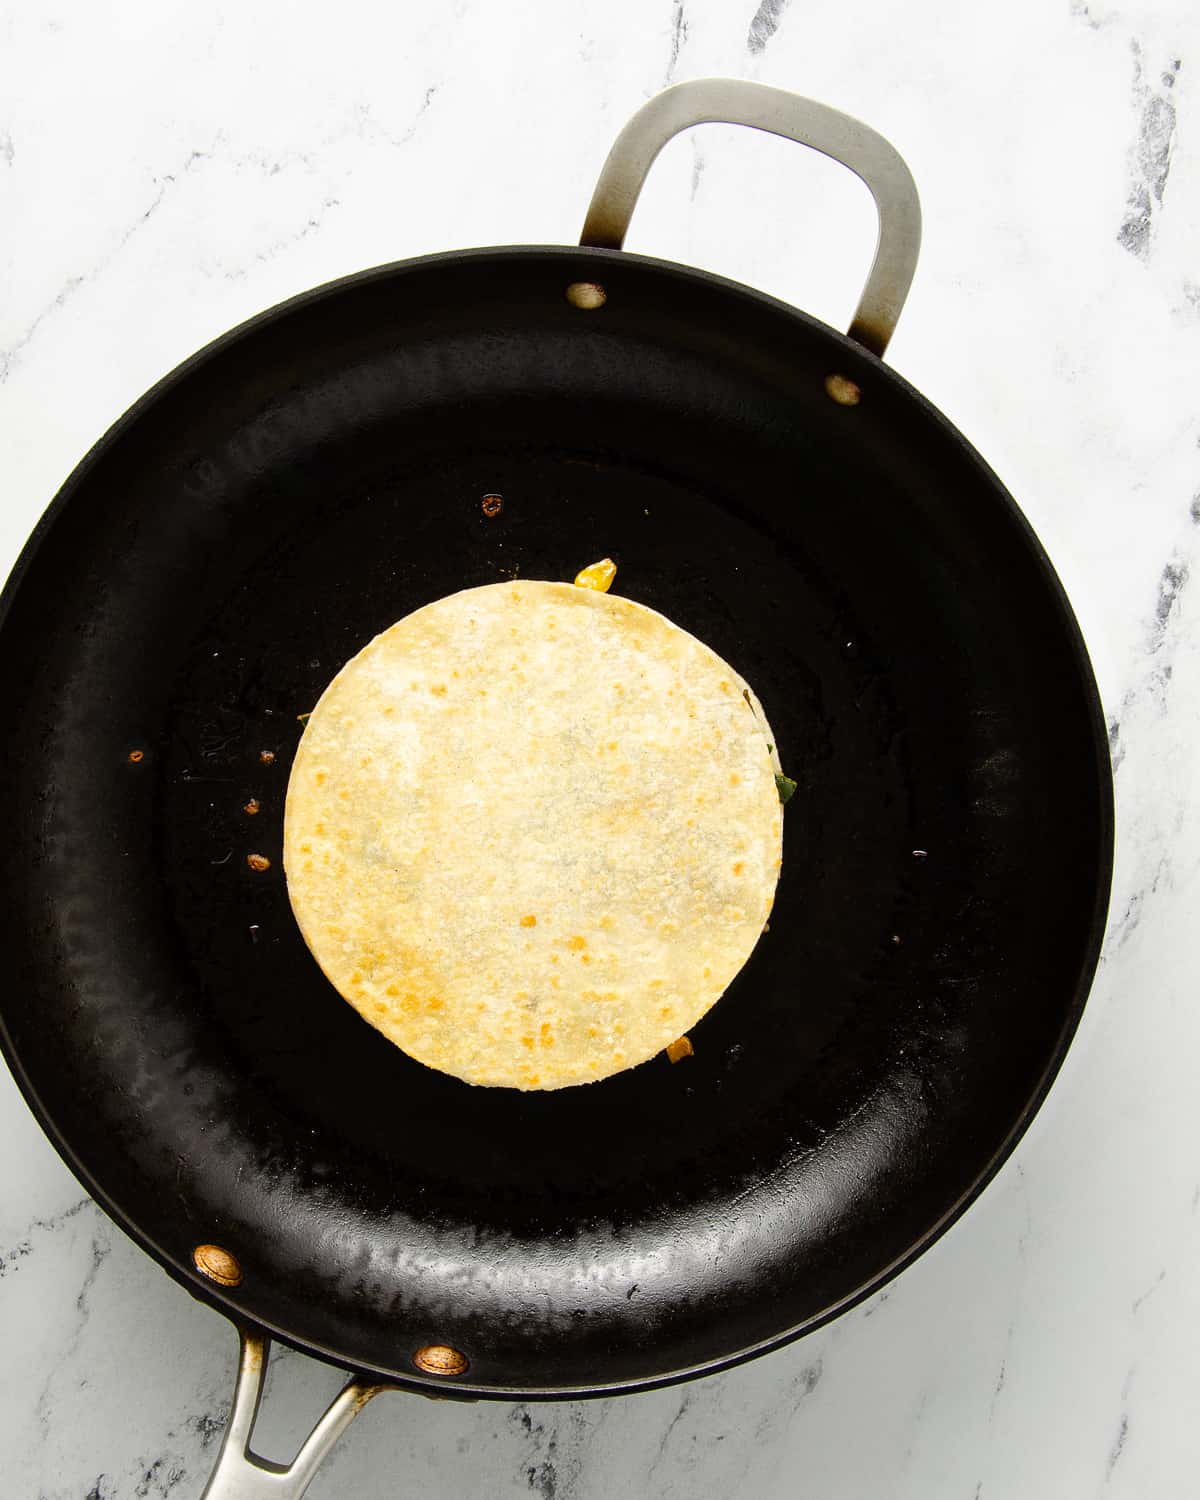 A cooked quesadilla flipped over in a skillet.